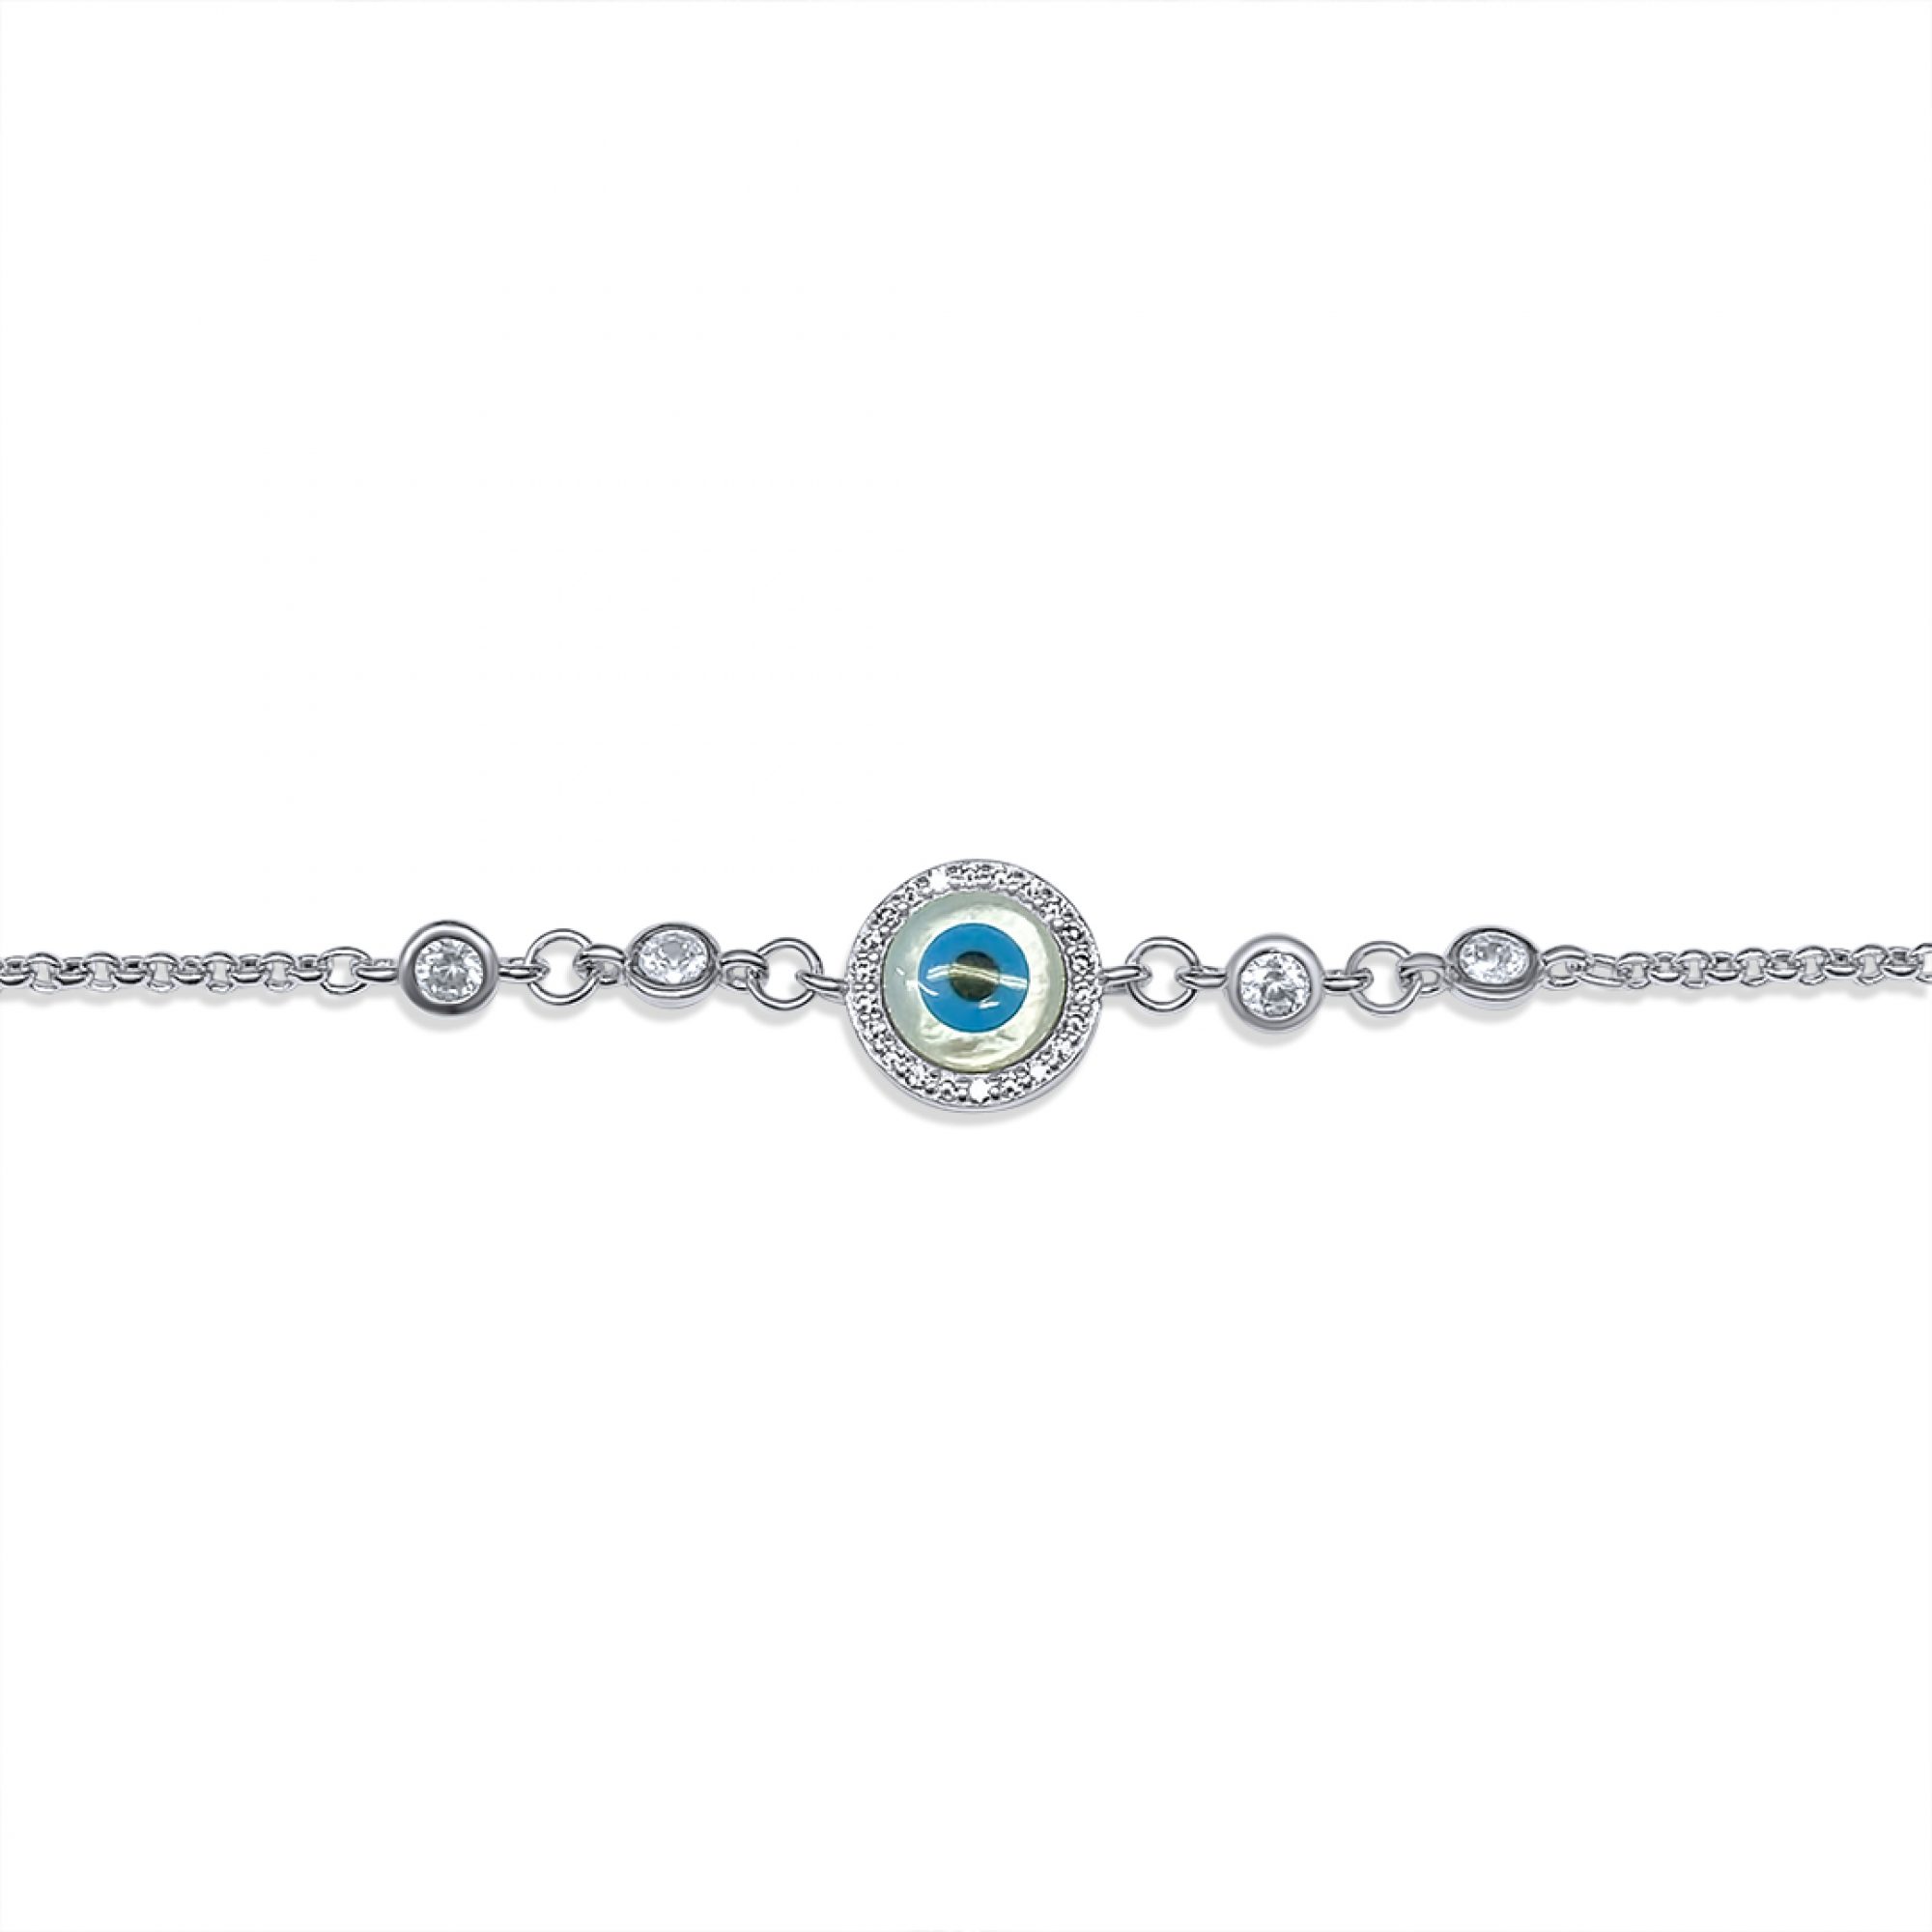 Eye bracelet with mother of pearl and zircon stones